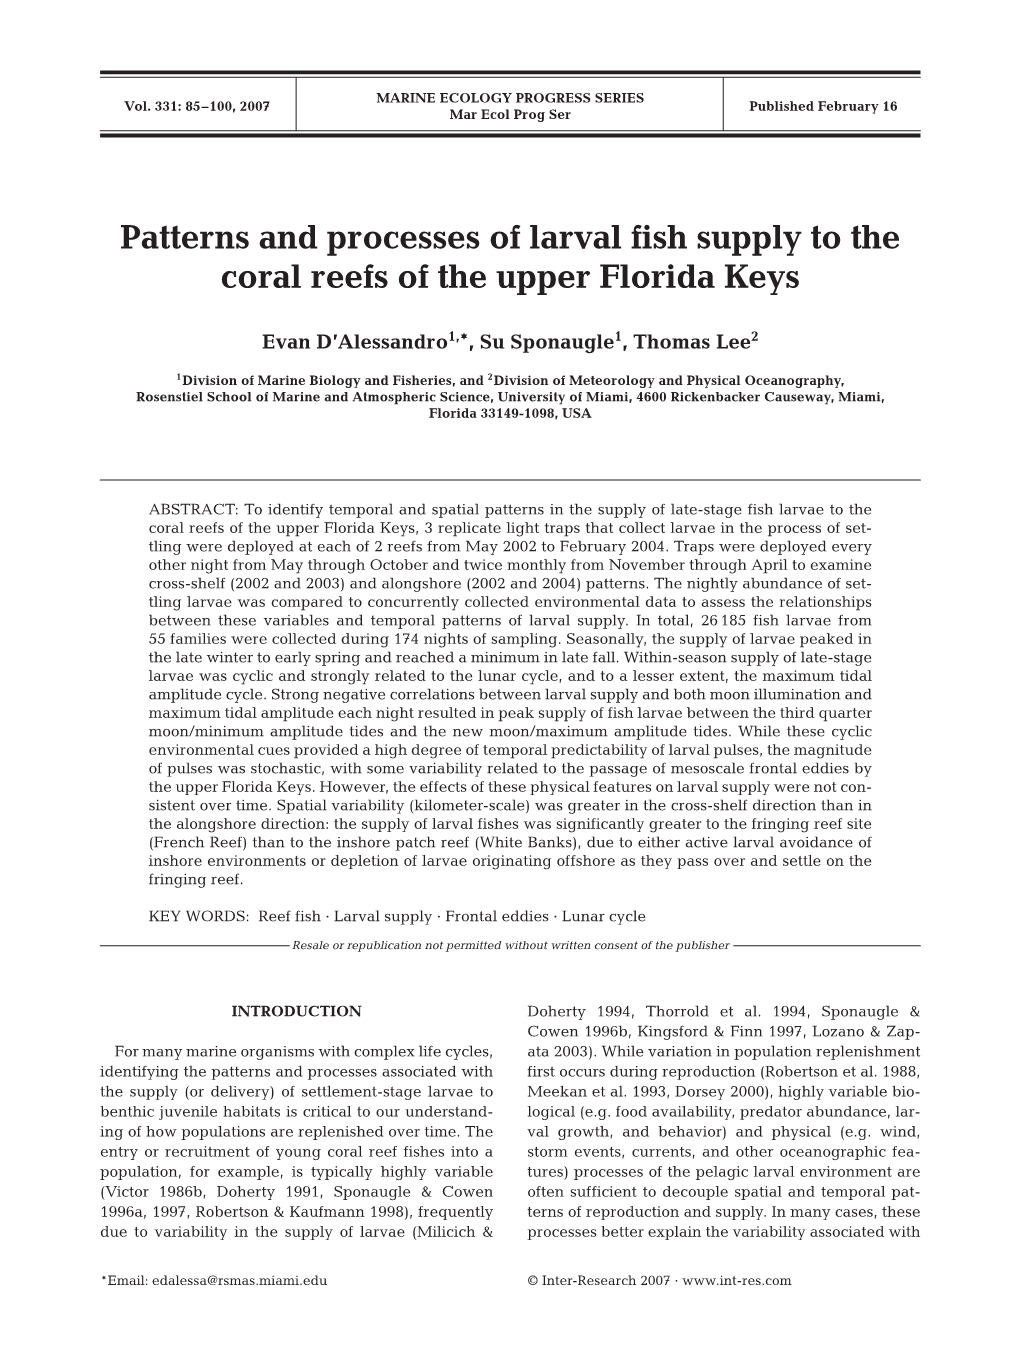 Patterns and Processes of Larval Fish Supply to the Coral Reefs of the Upper Florida Keys